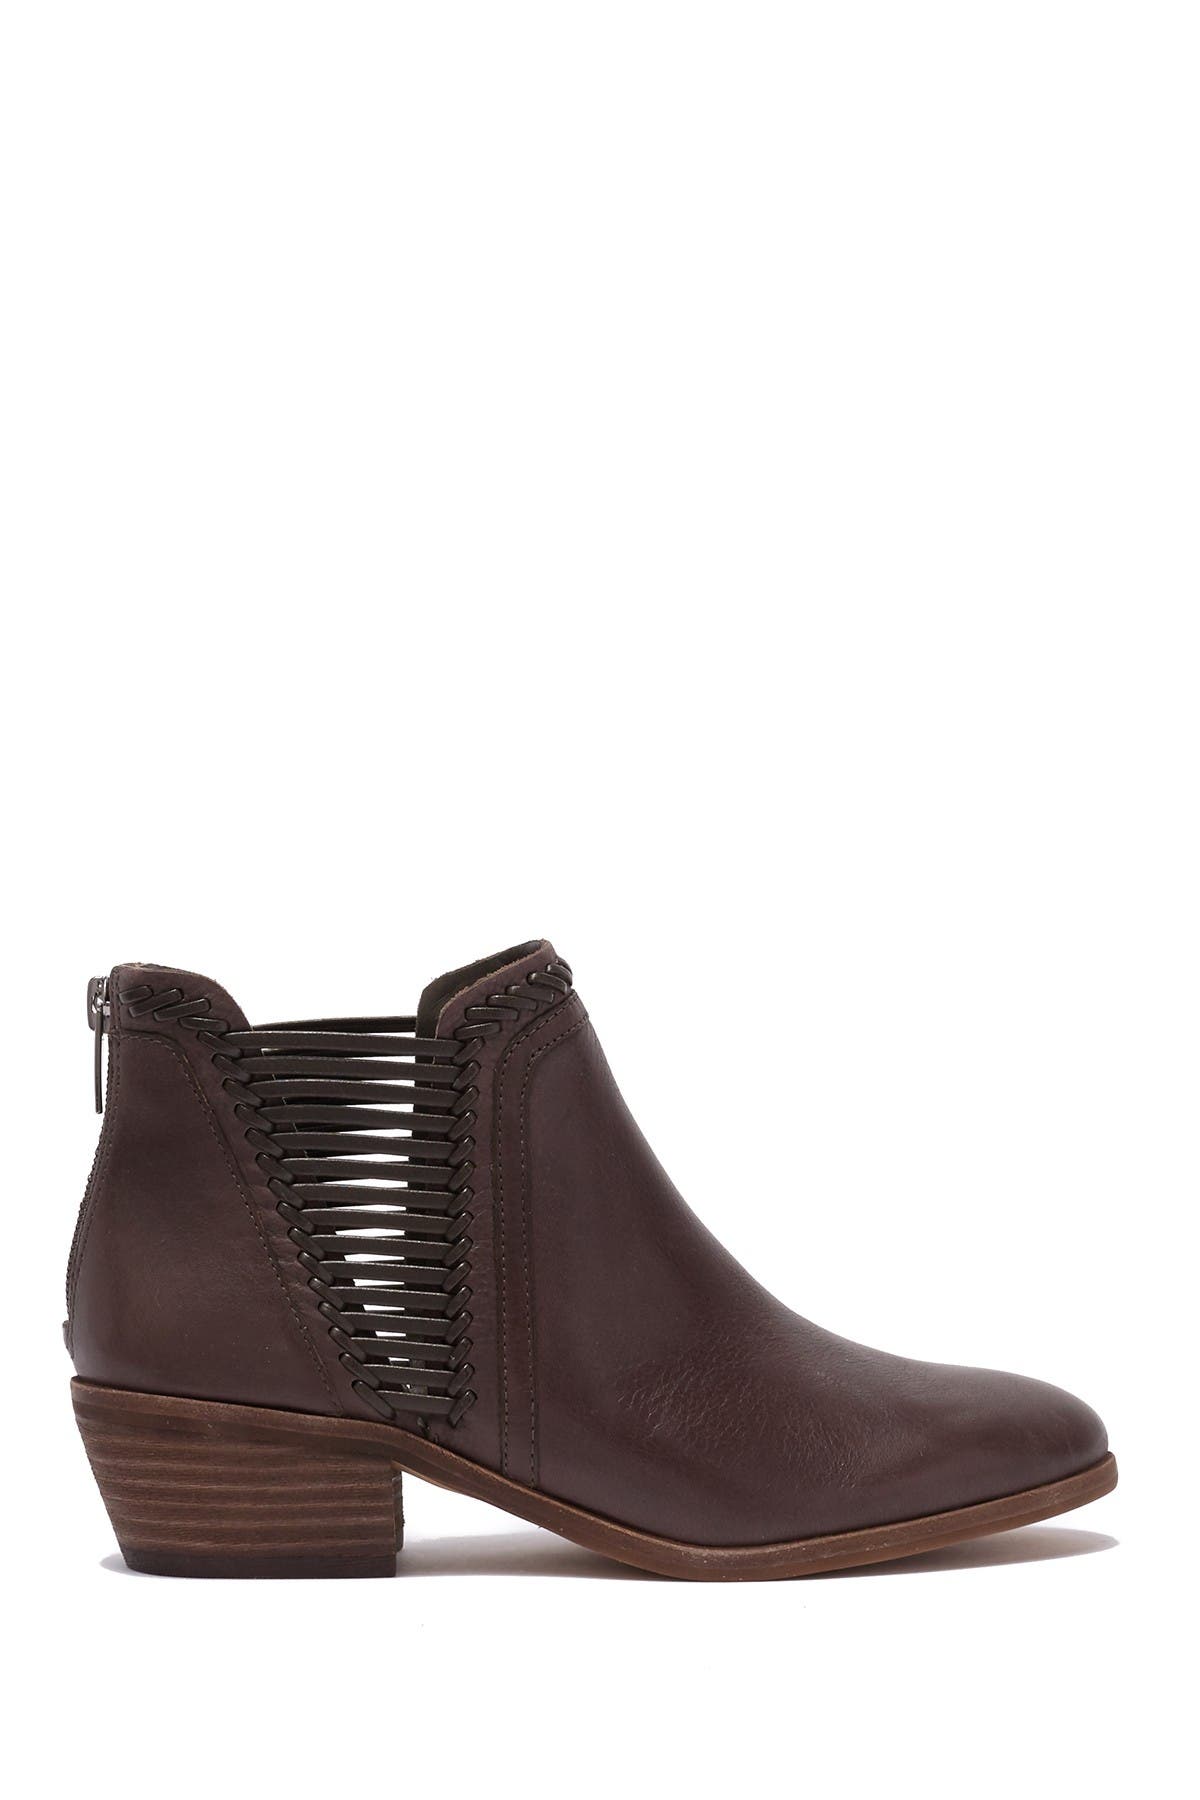 vince camuto pippsy suede booties